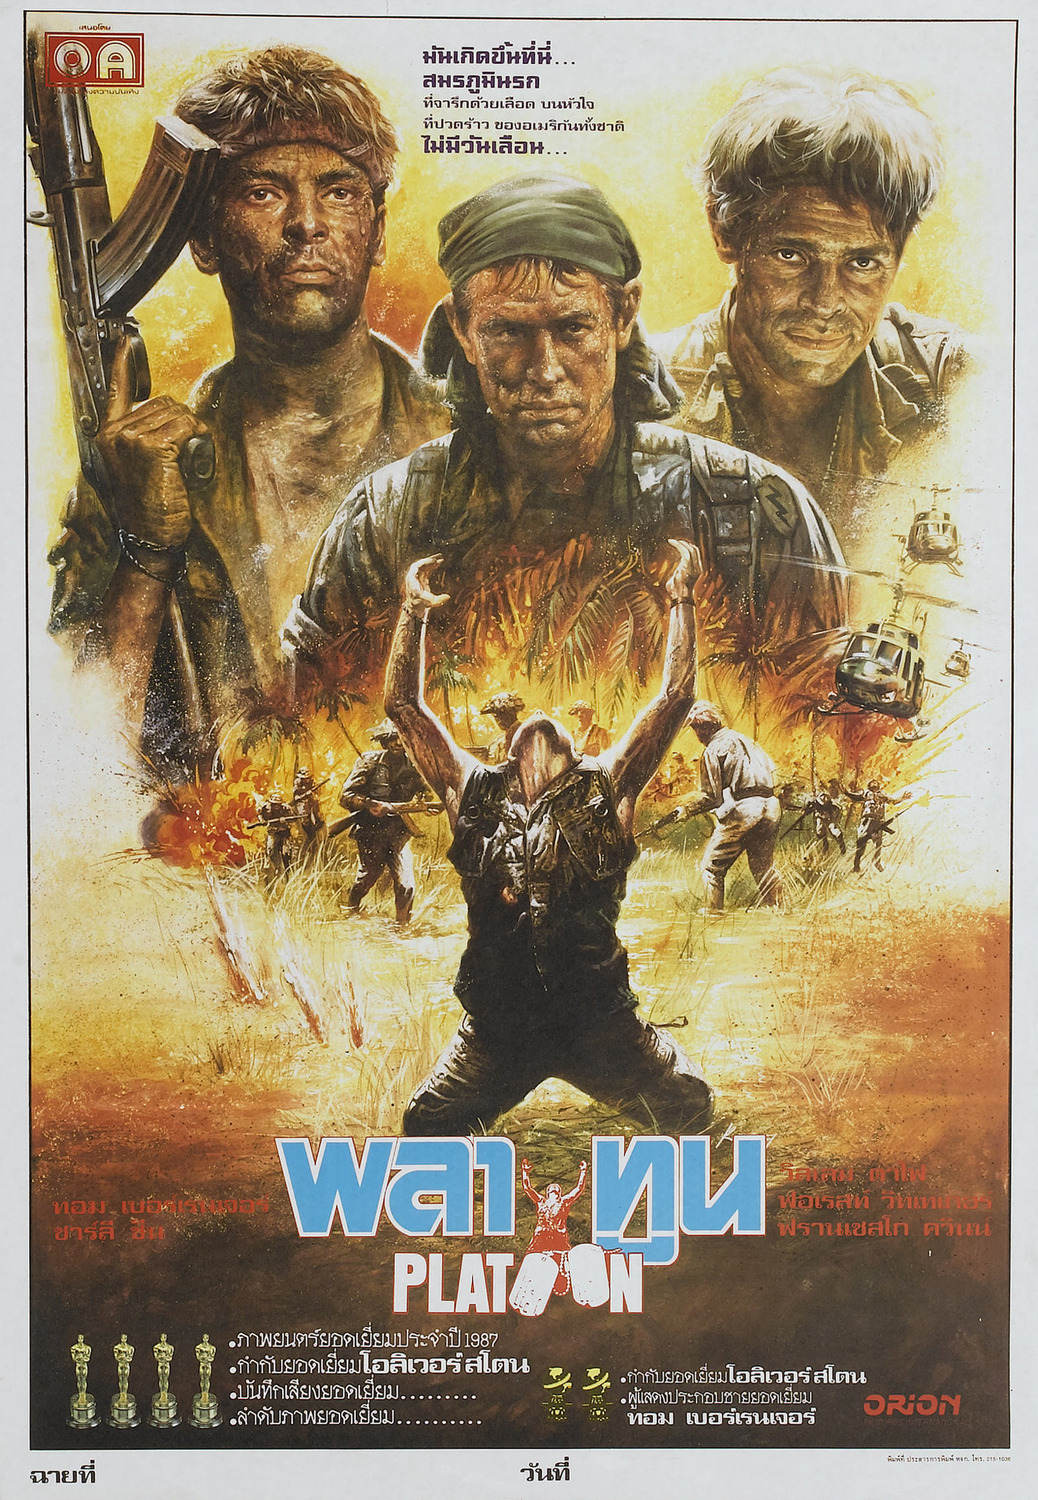 Extra Large Movie Poster Image for Platoon (#9 of 12)